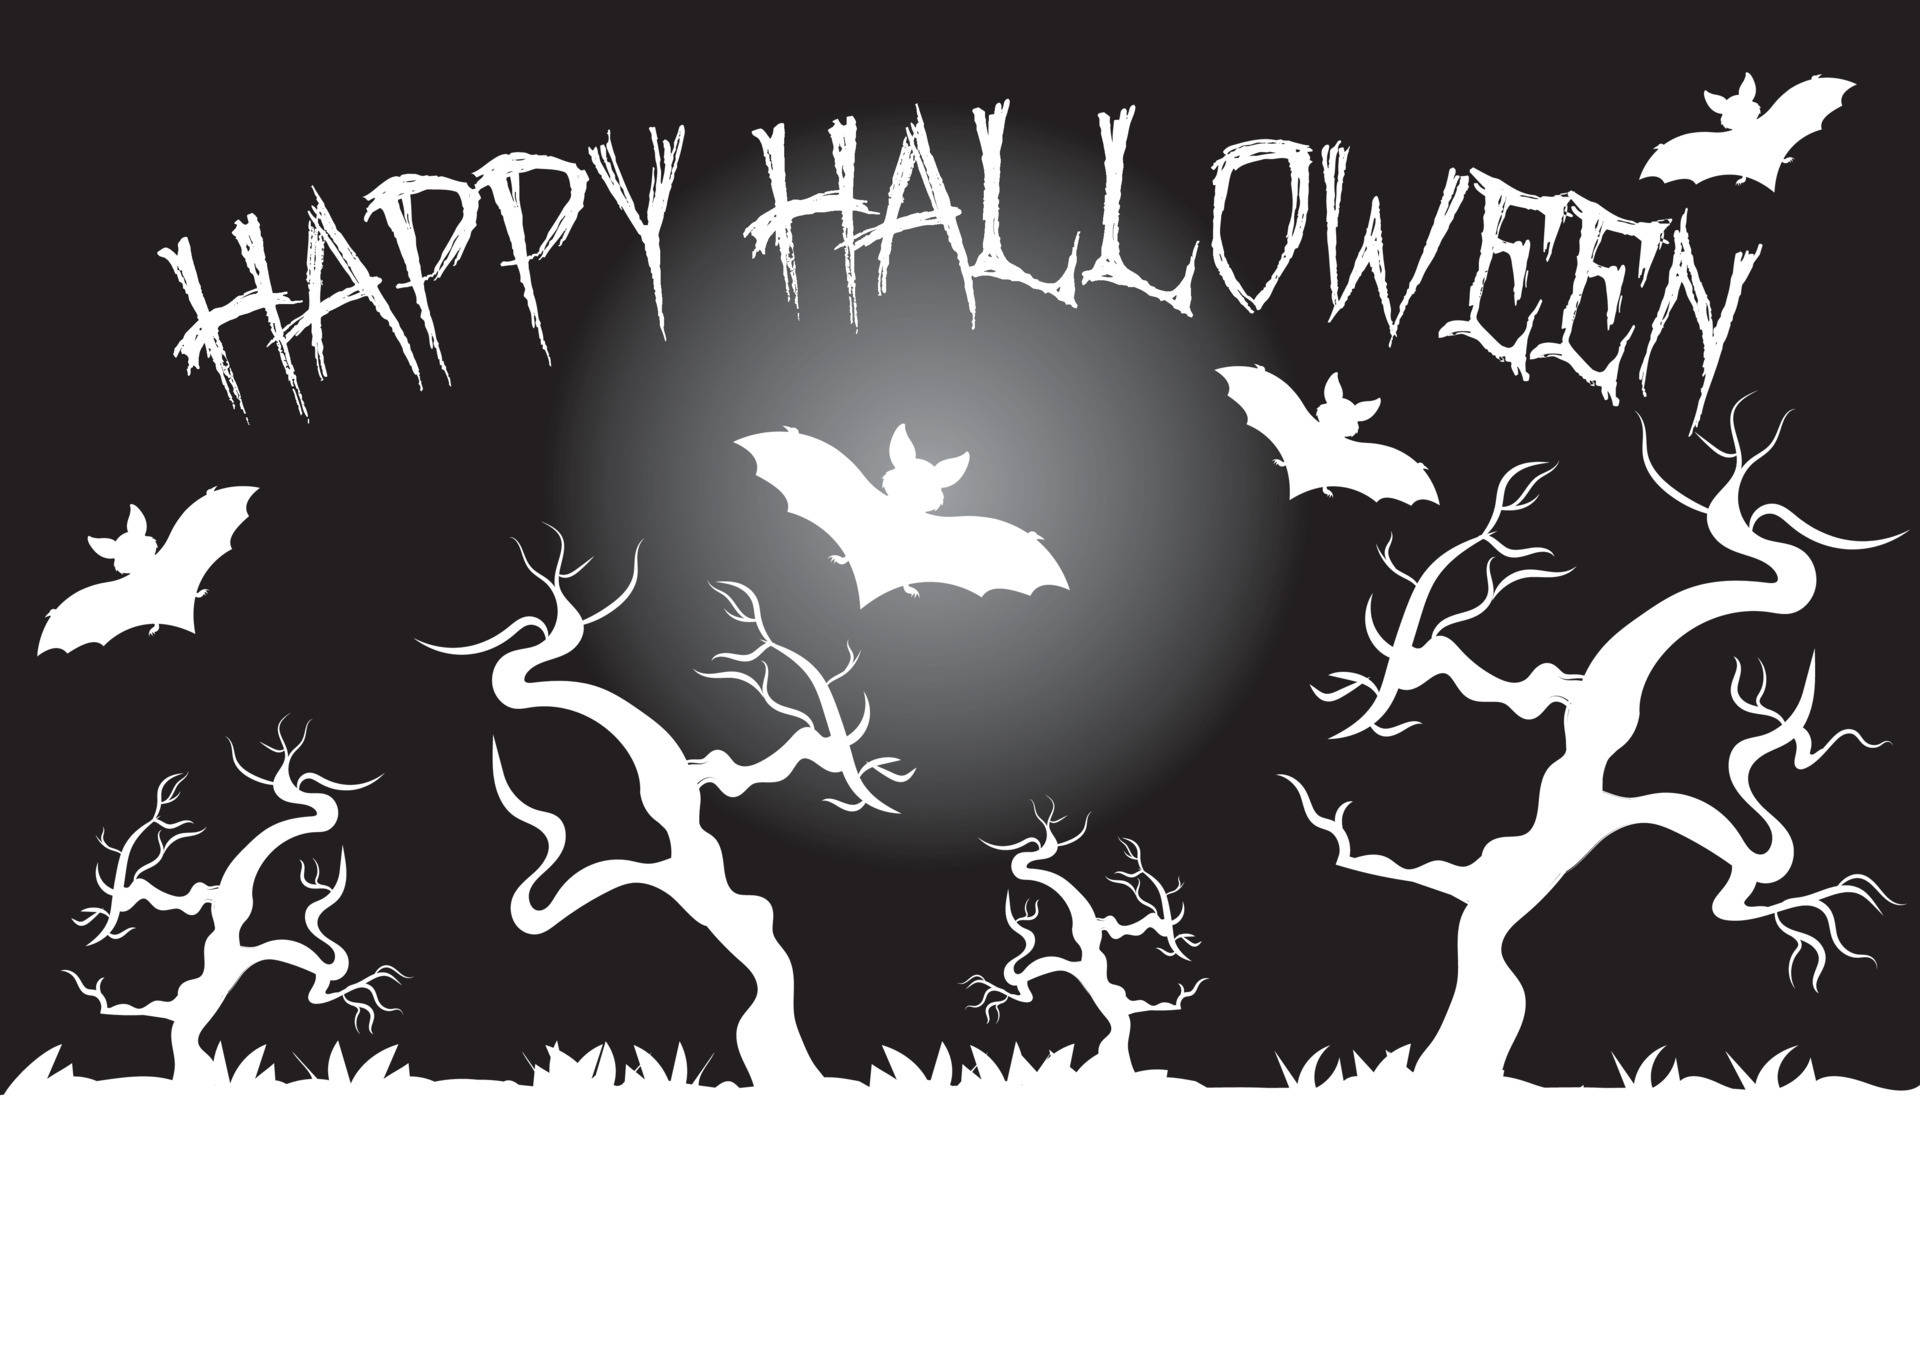 Trick or Treat! Have a Happy Halloween! Wallpaper